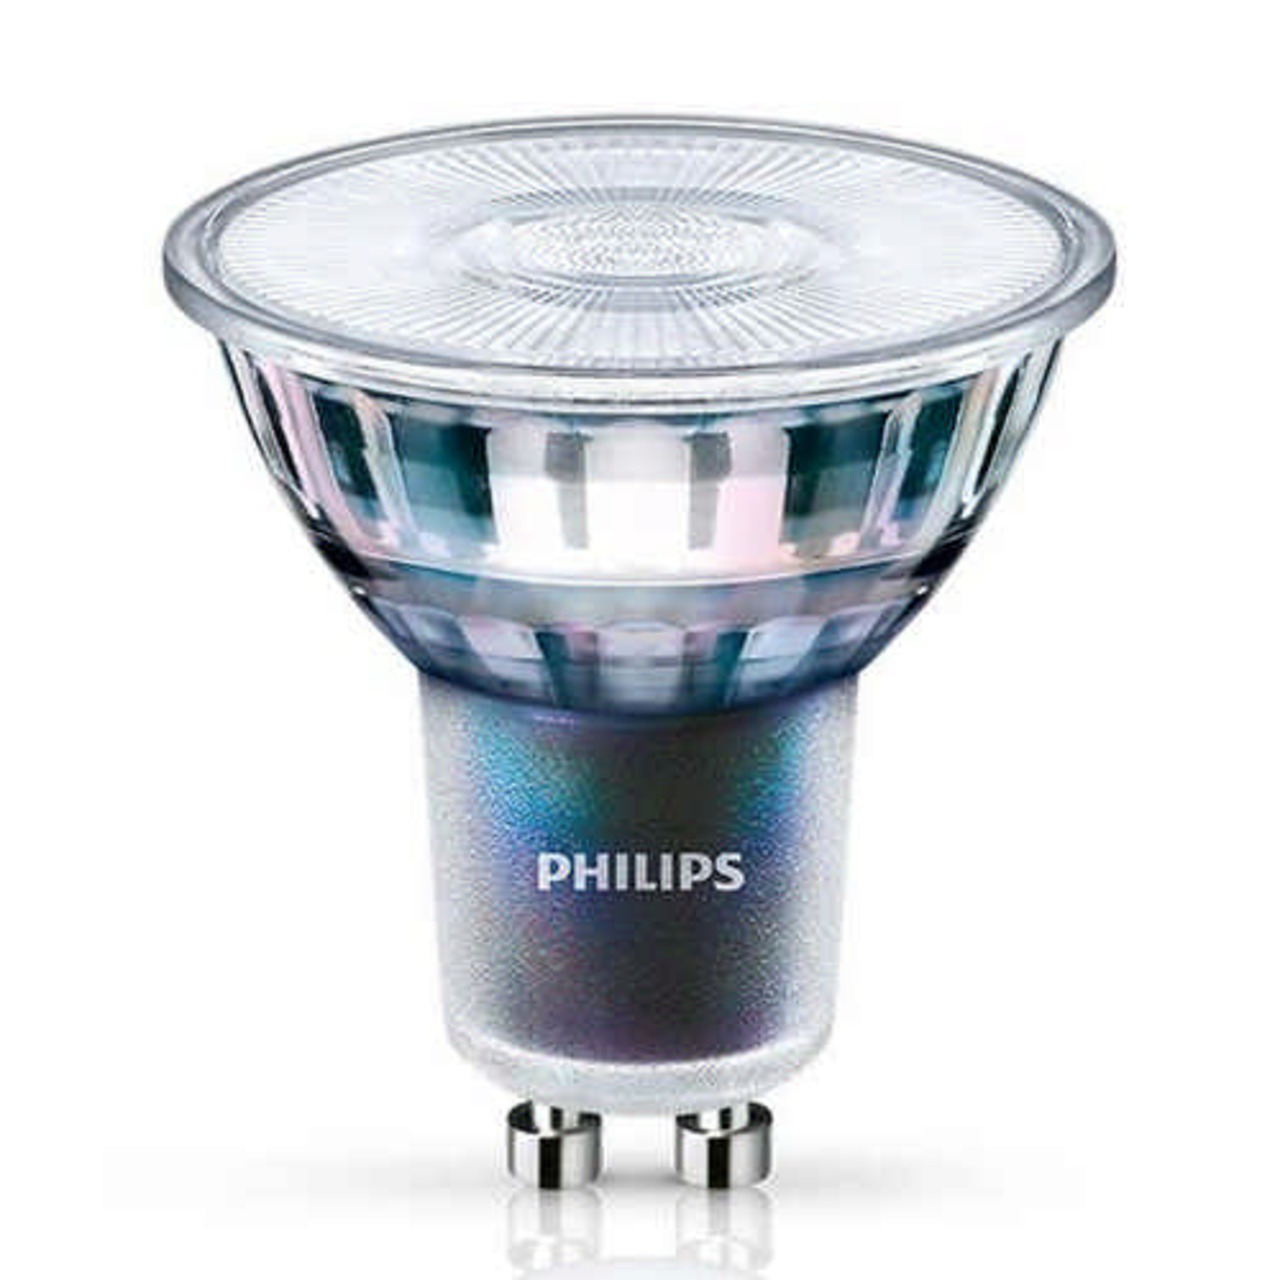 Philips MASTER ExpertColor 3-9-W-GU10-LED-Lampe- 300 lm- 97 Ra- 25- 4000K- neutralweiss- dimmbar